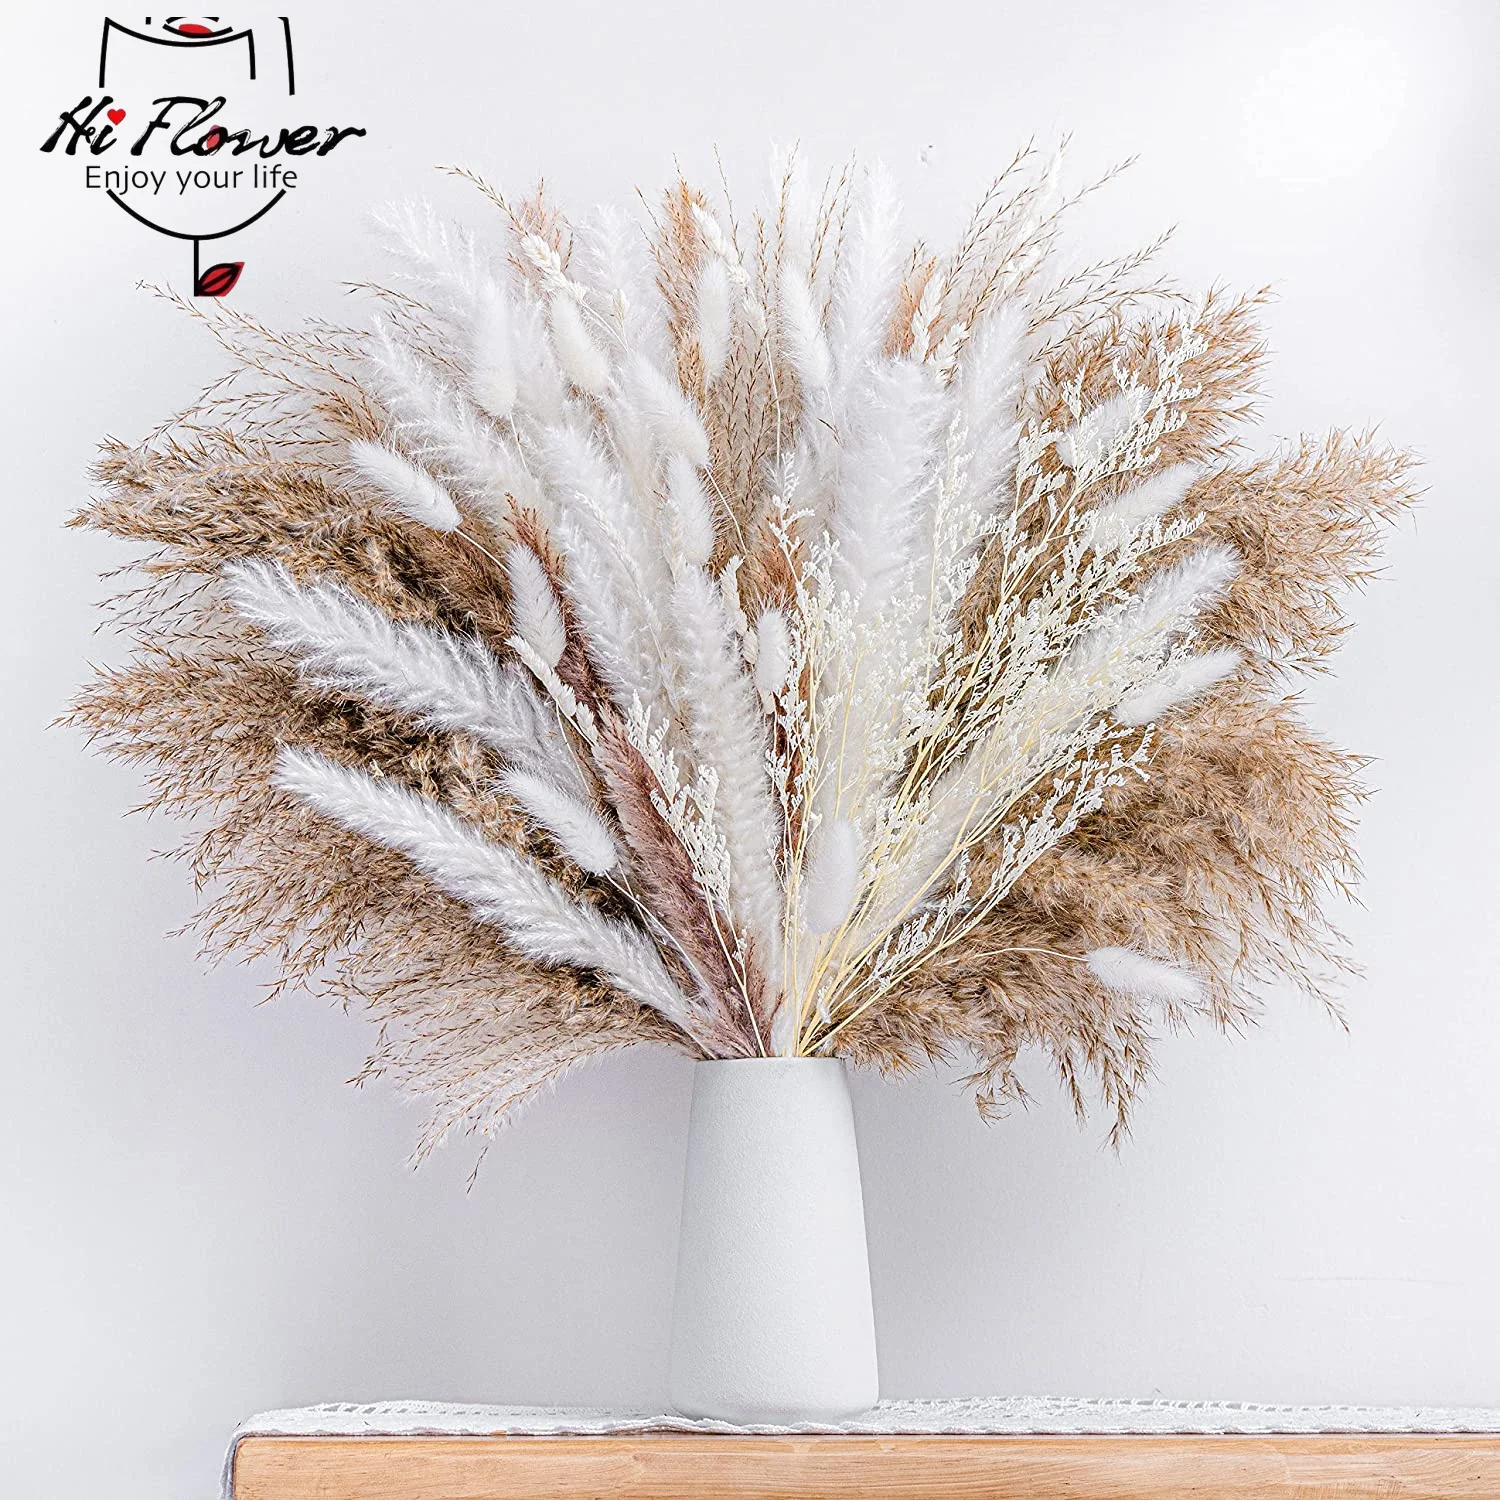 

80pcs Natural Dried Fluffy Pampas Bunny Rabbit Tail Grass Bouquet for Wedding Country Decoration Eucalyptus Reed Boho Home Decor